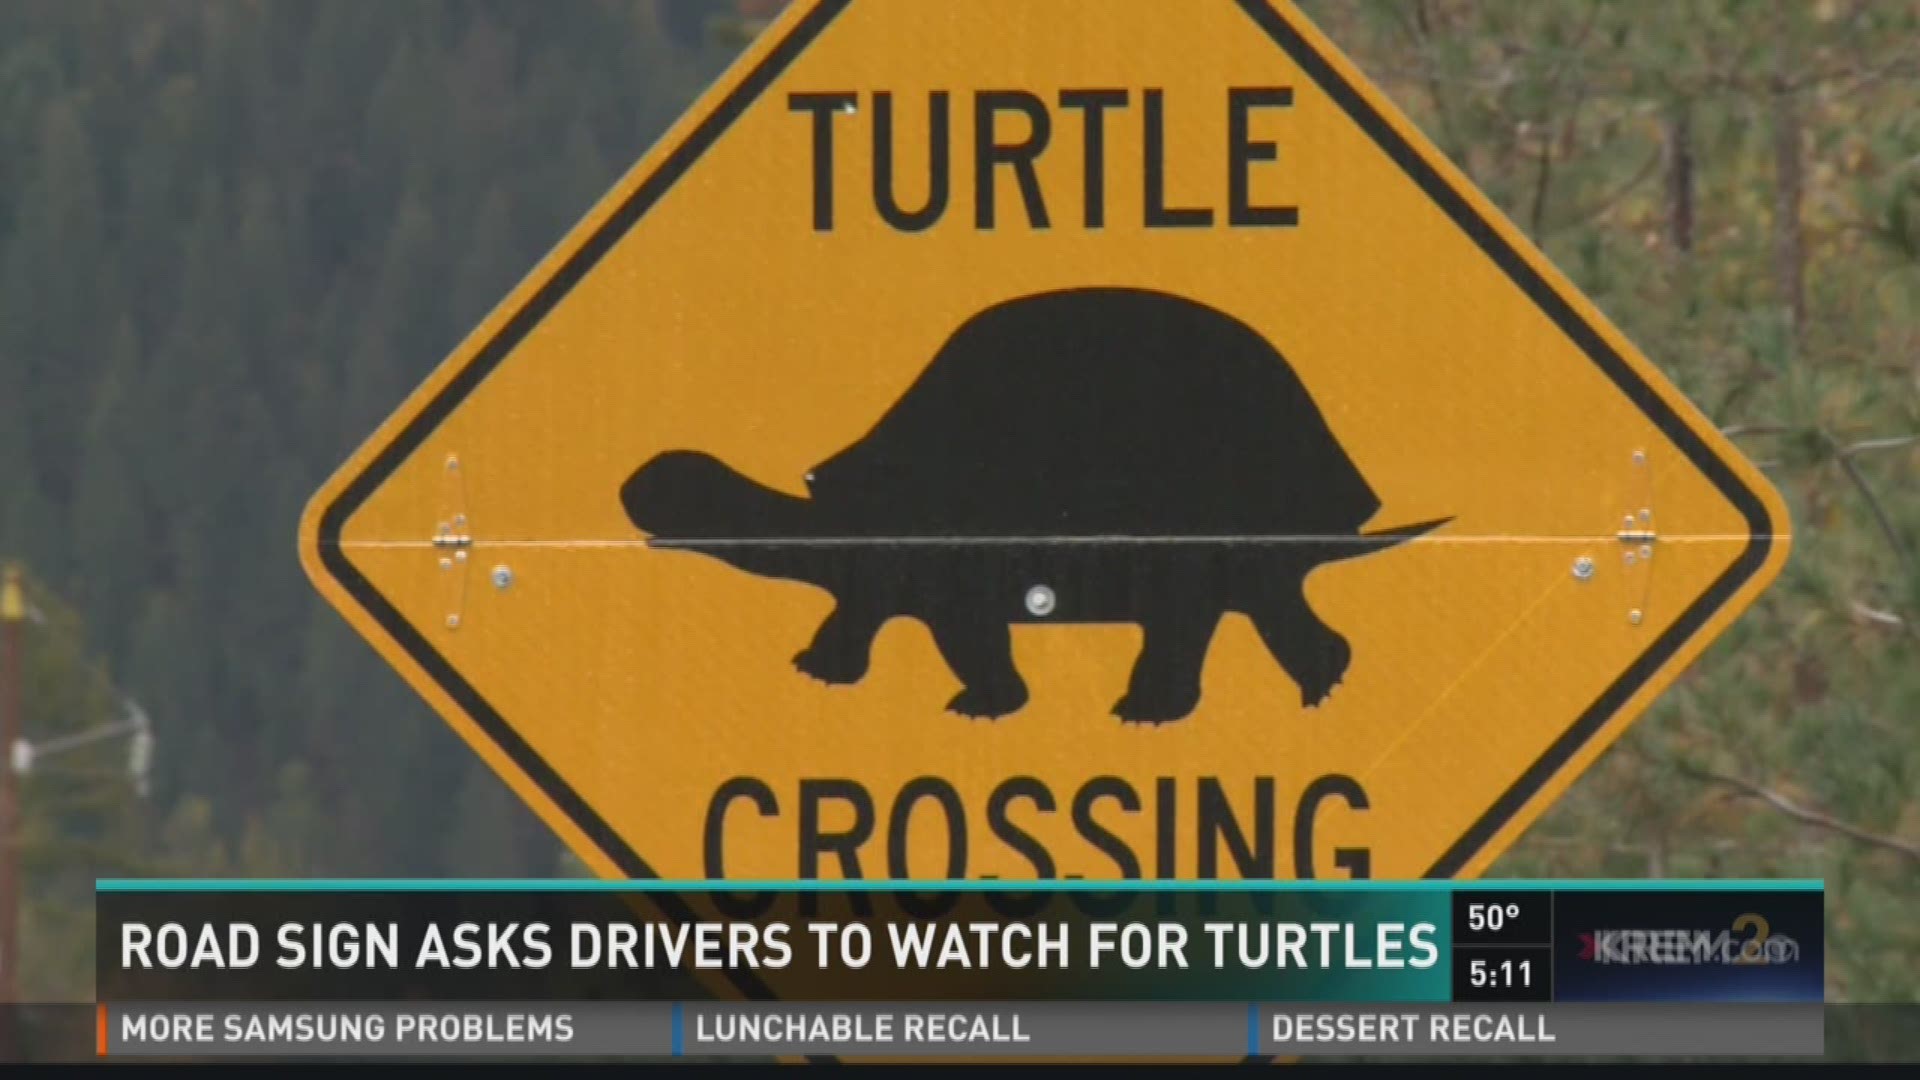 KREM 2's Taylor Viydo reports on an unusual sign on the side of the road in Bonner County. (10/10/16)